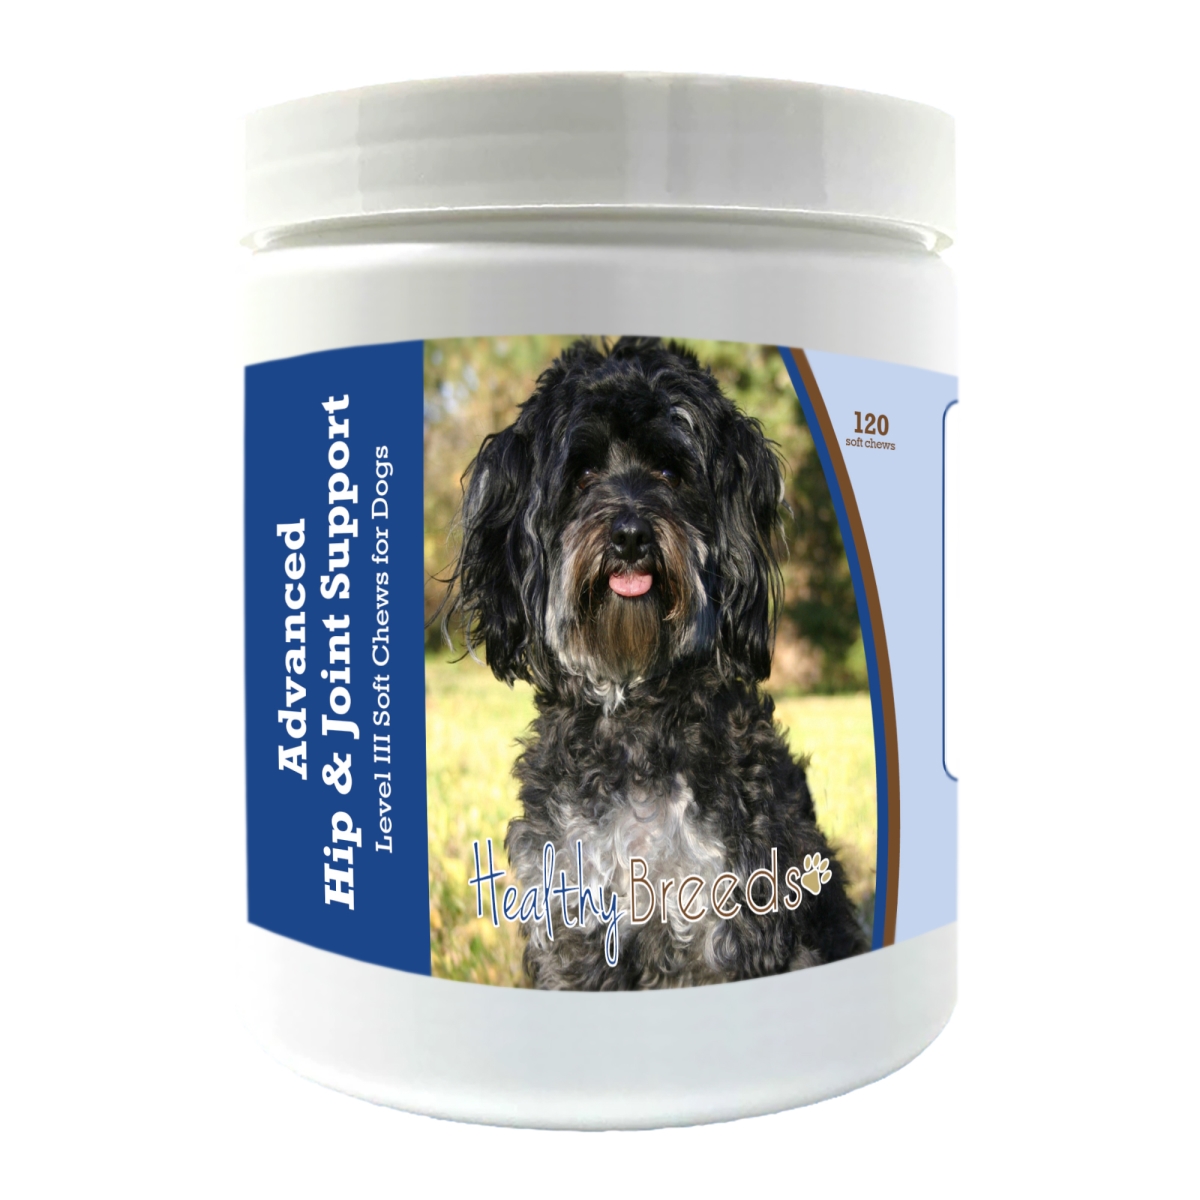 Picture of Healthy Breeds 192959898729 Maltipoo Advanced Hip & Joint Support Level III Soft Chews for Dogs